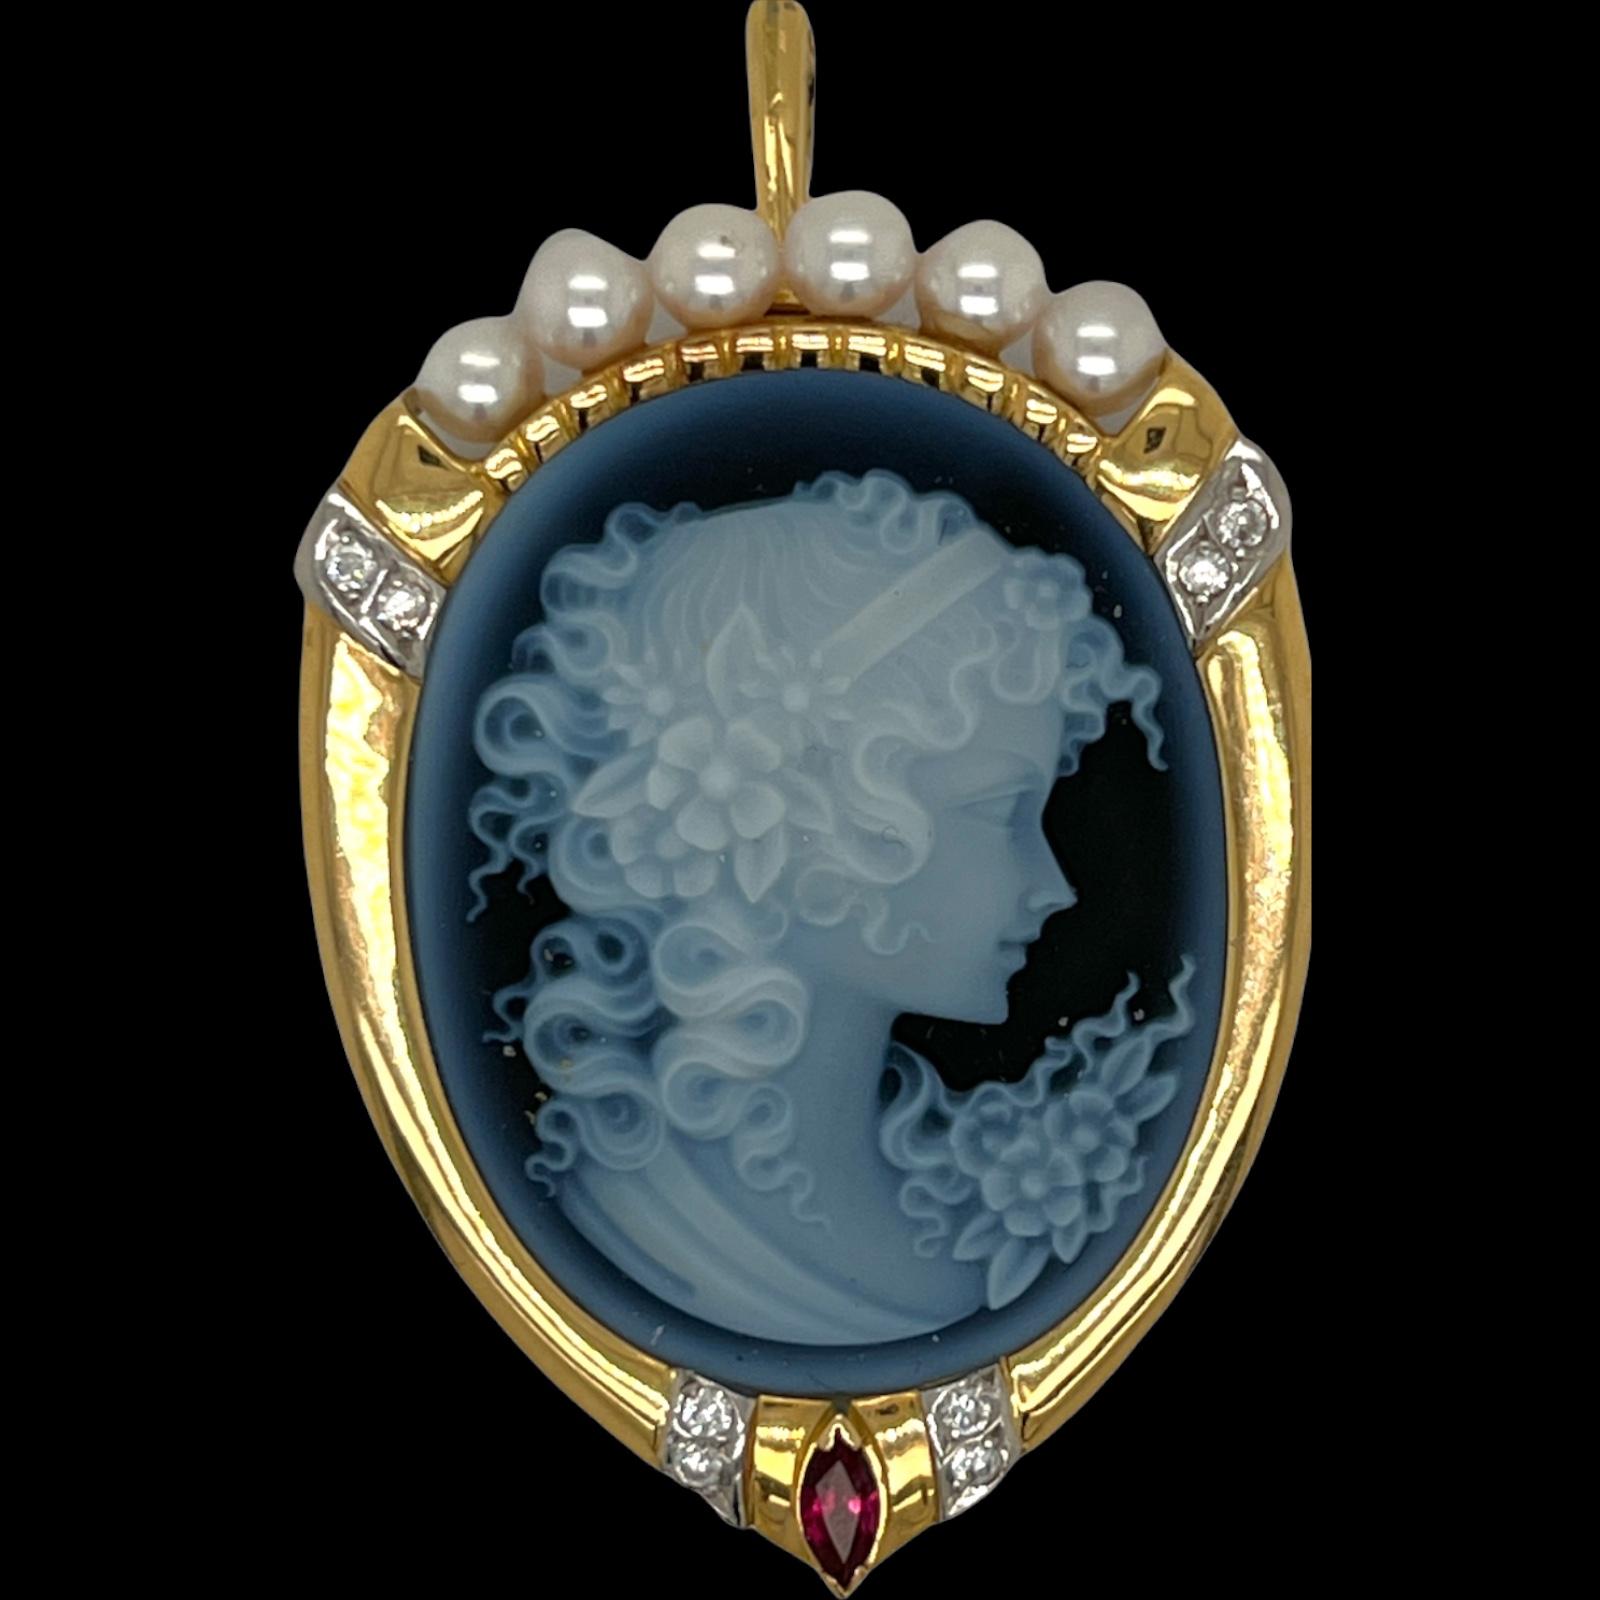 Beautiful carved cameo pendant and pin fashioned in 18 karat yellow gold and platinum. The oval onyx carved cameo is surrounded by 8 round brilliant cut diamonds weighing approximately .15 carat total weight and graded G-H/VS. The pendant is also